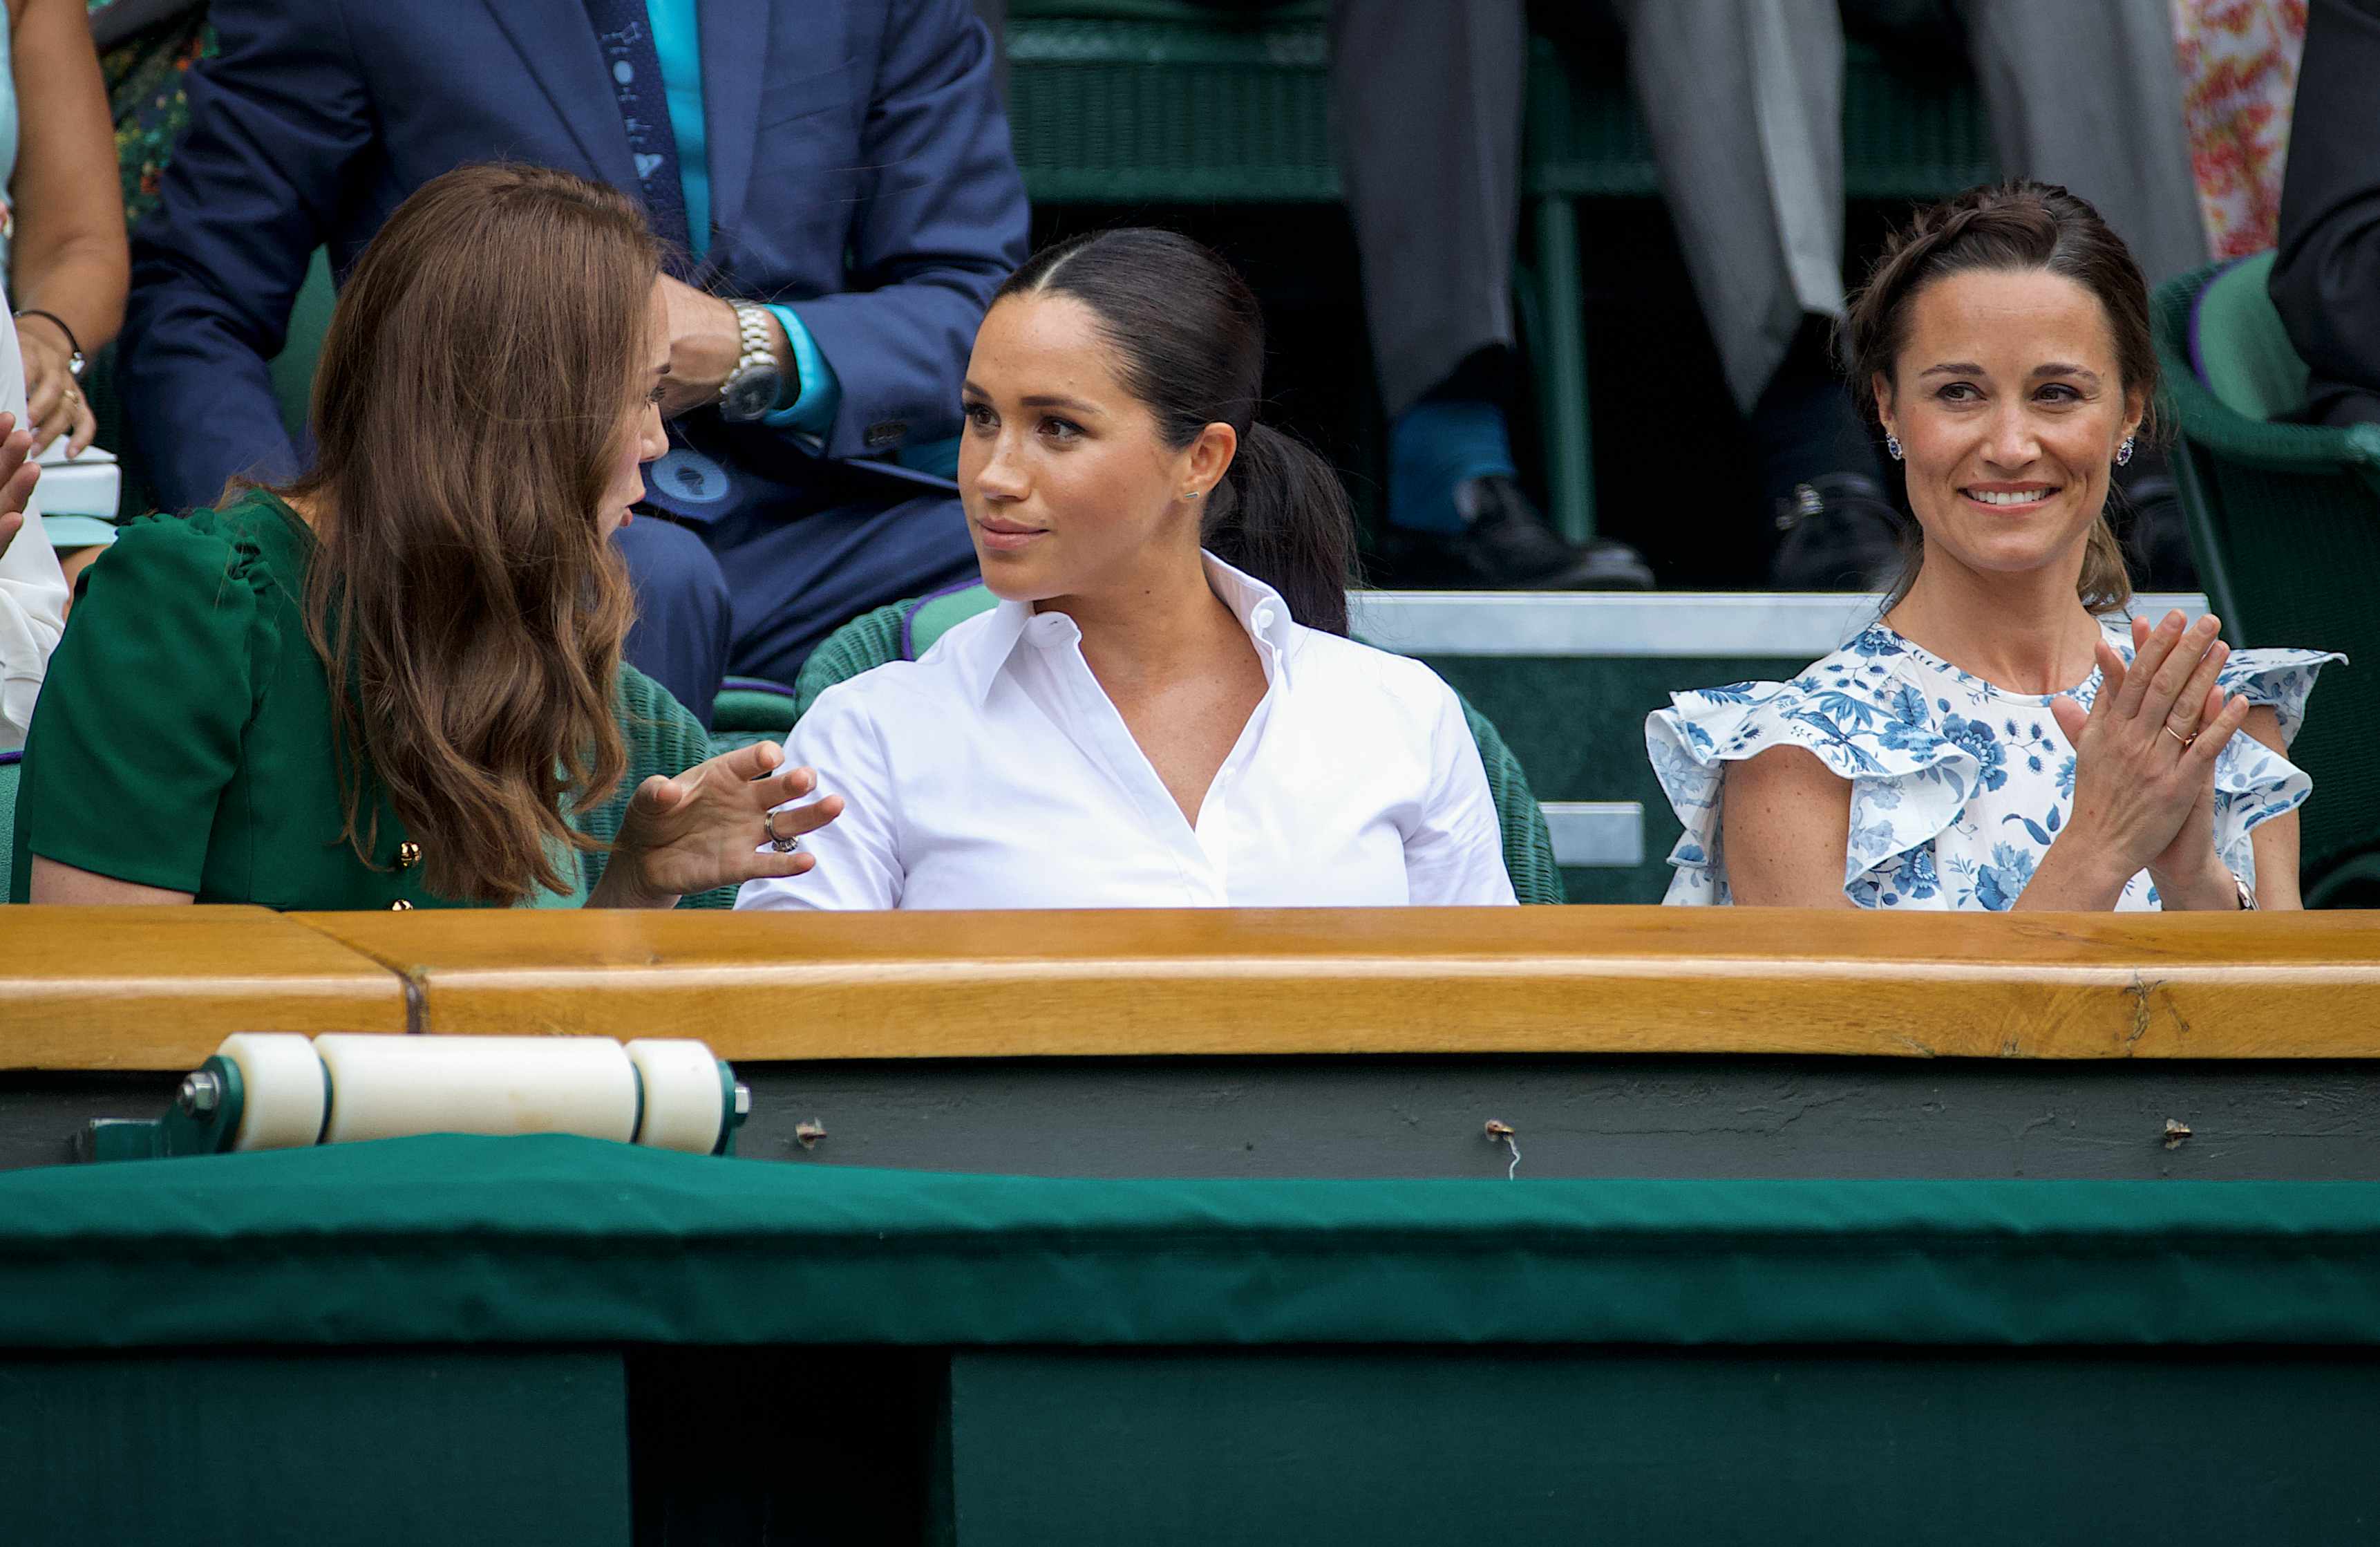 Prinzessin Catherine, Meghan Markle und Pippa Middleton in Wimbledon 2019 im All England Lawn Tennis and Croquet Club am 13. Juli 2019 in London, England | Quelle: Getty Images